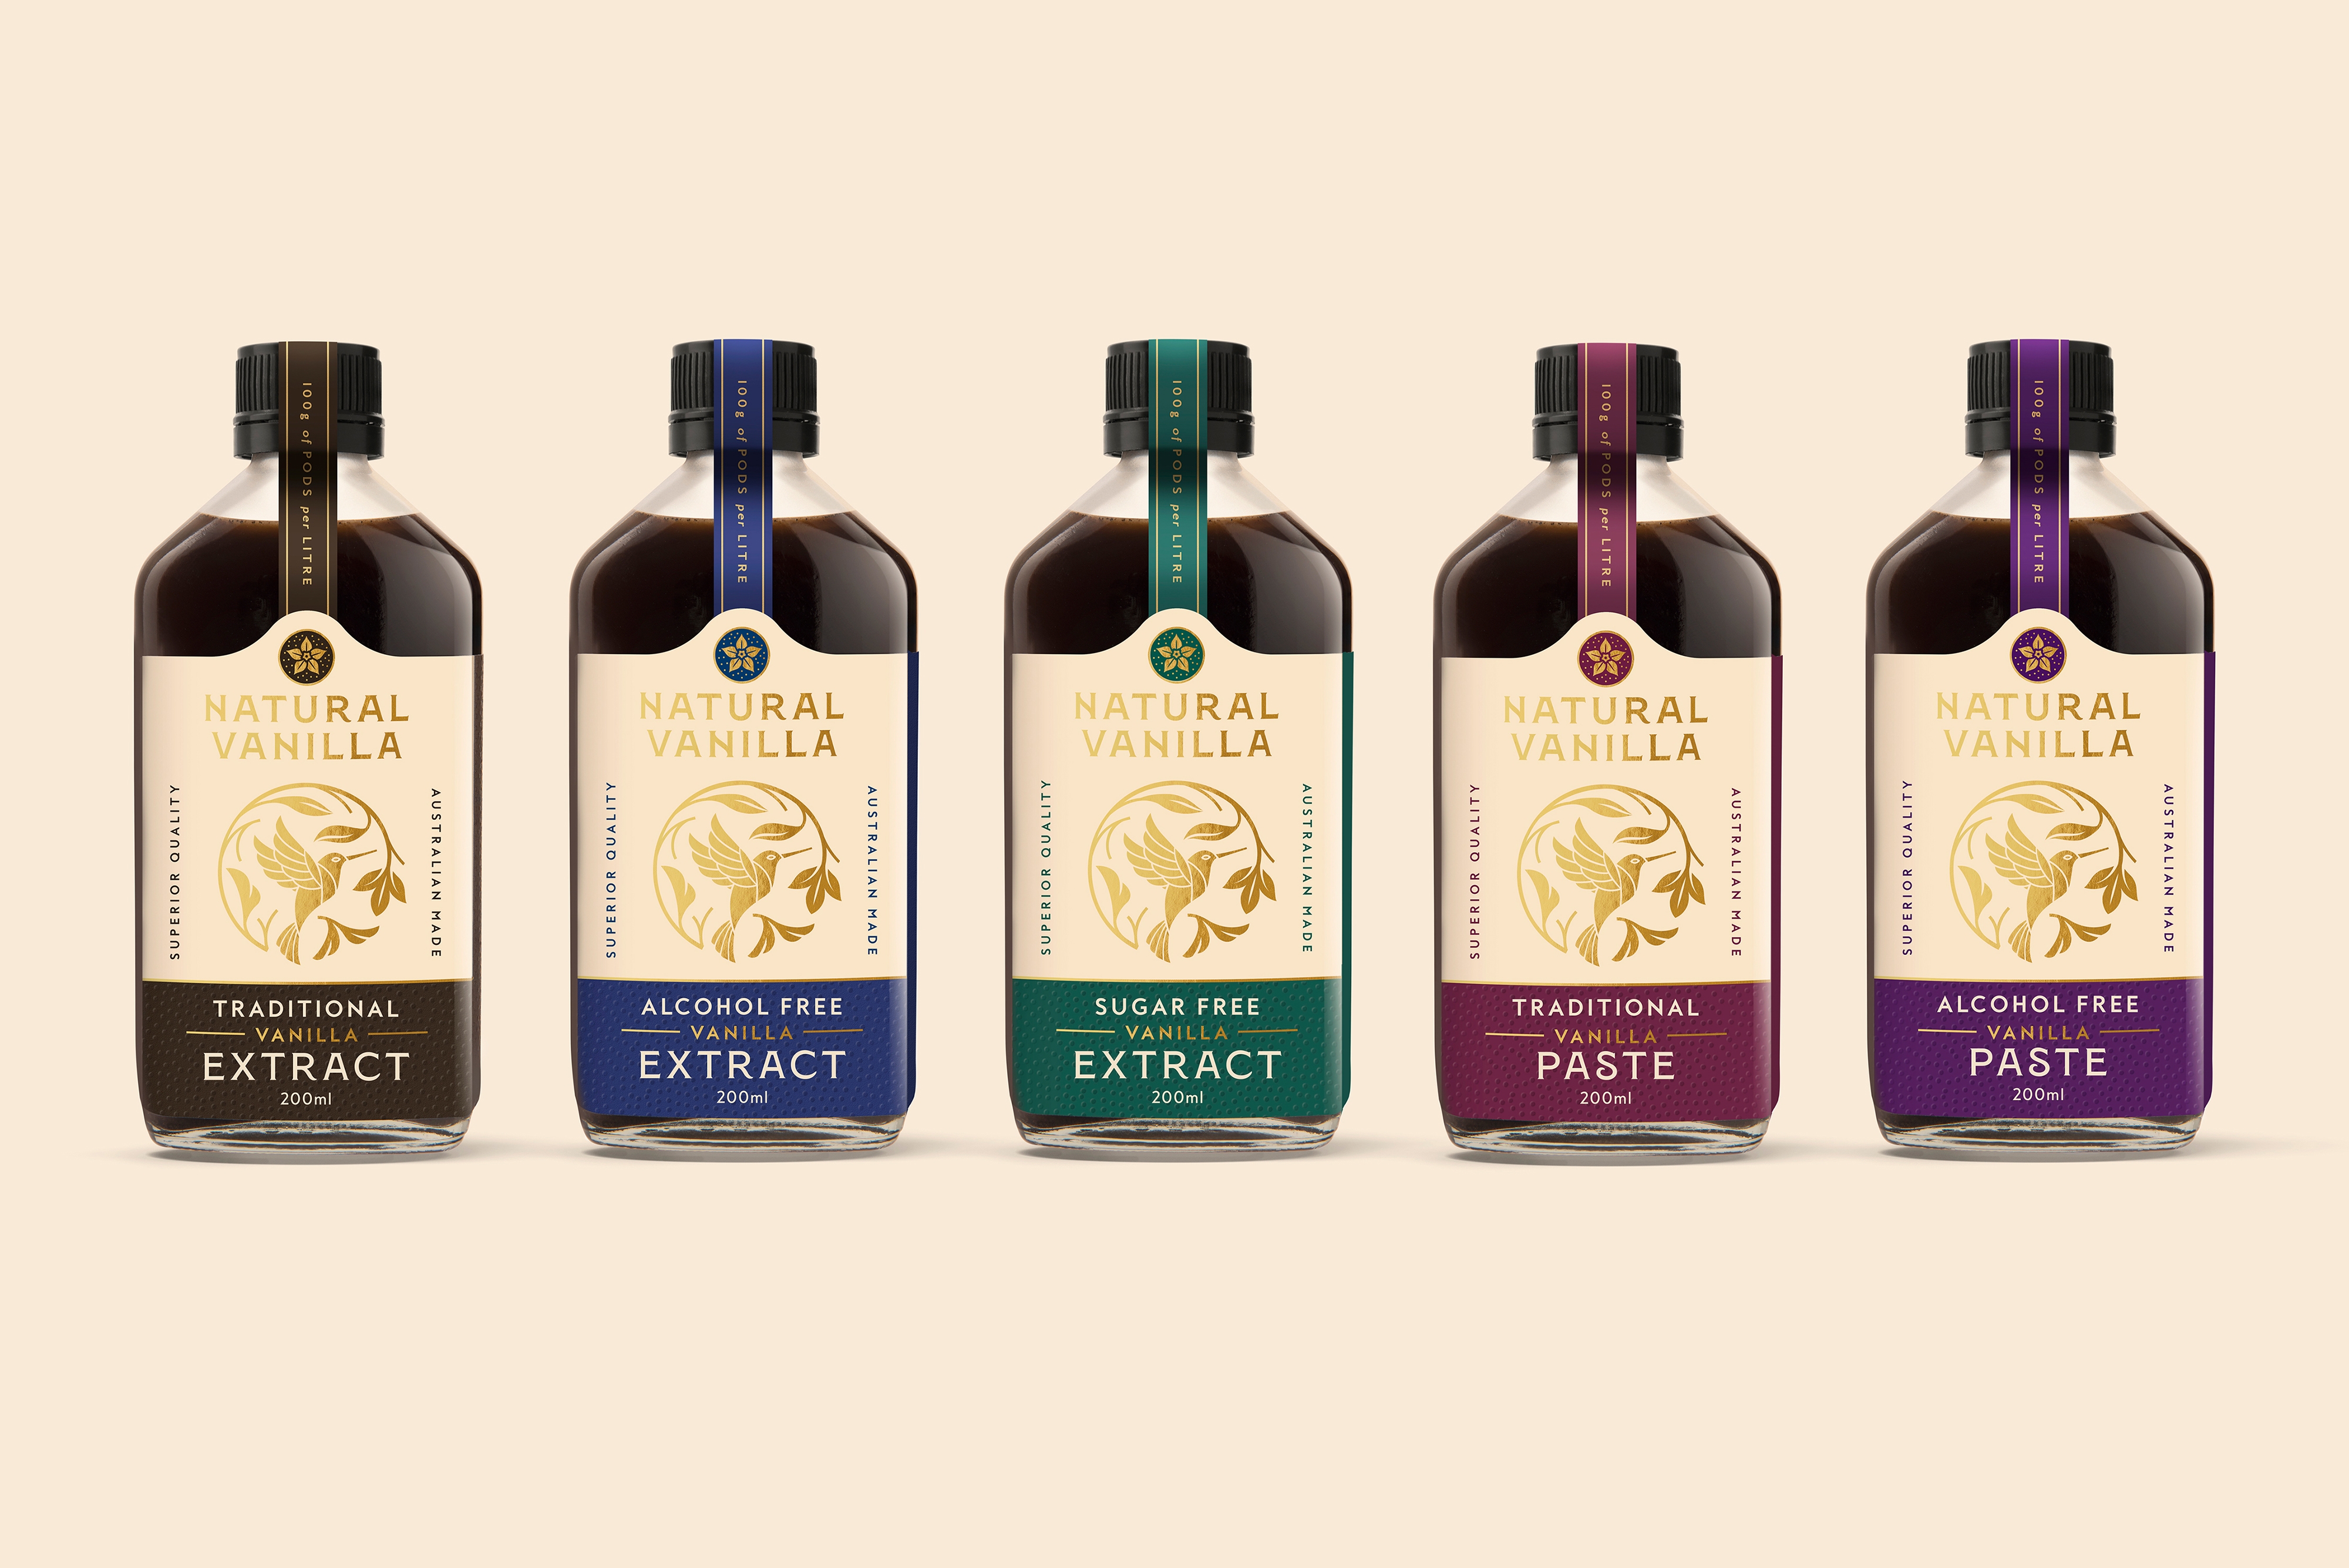 Packaging Redesign for Natural Vanilla